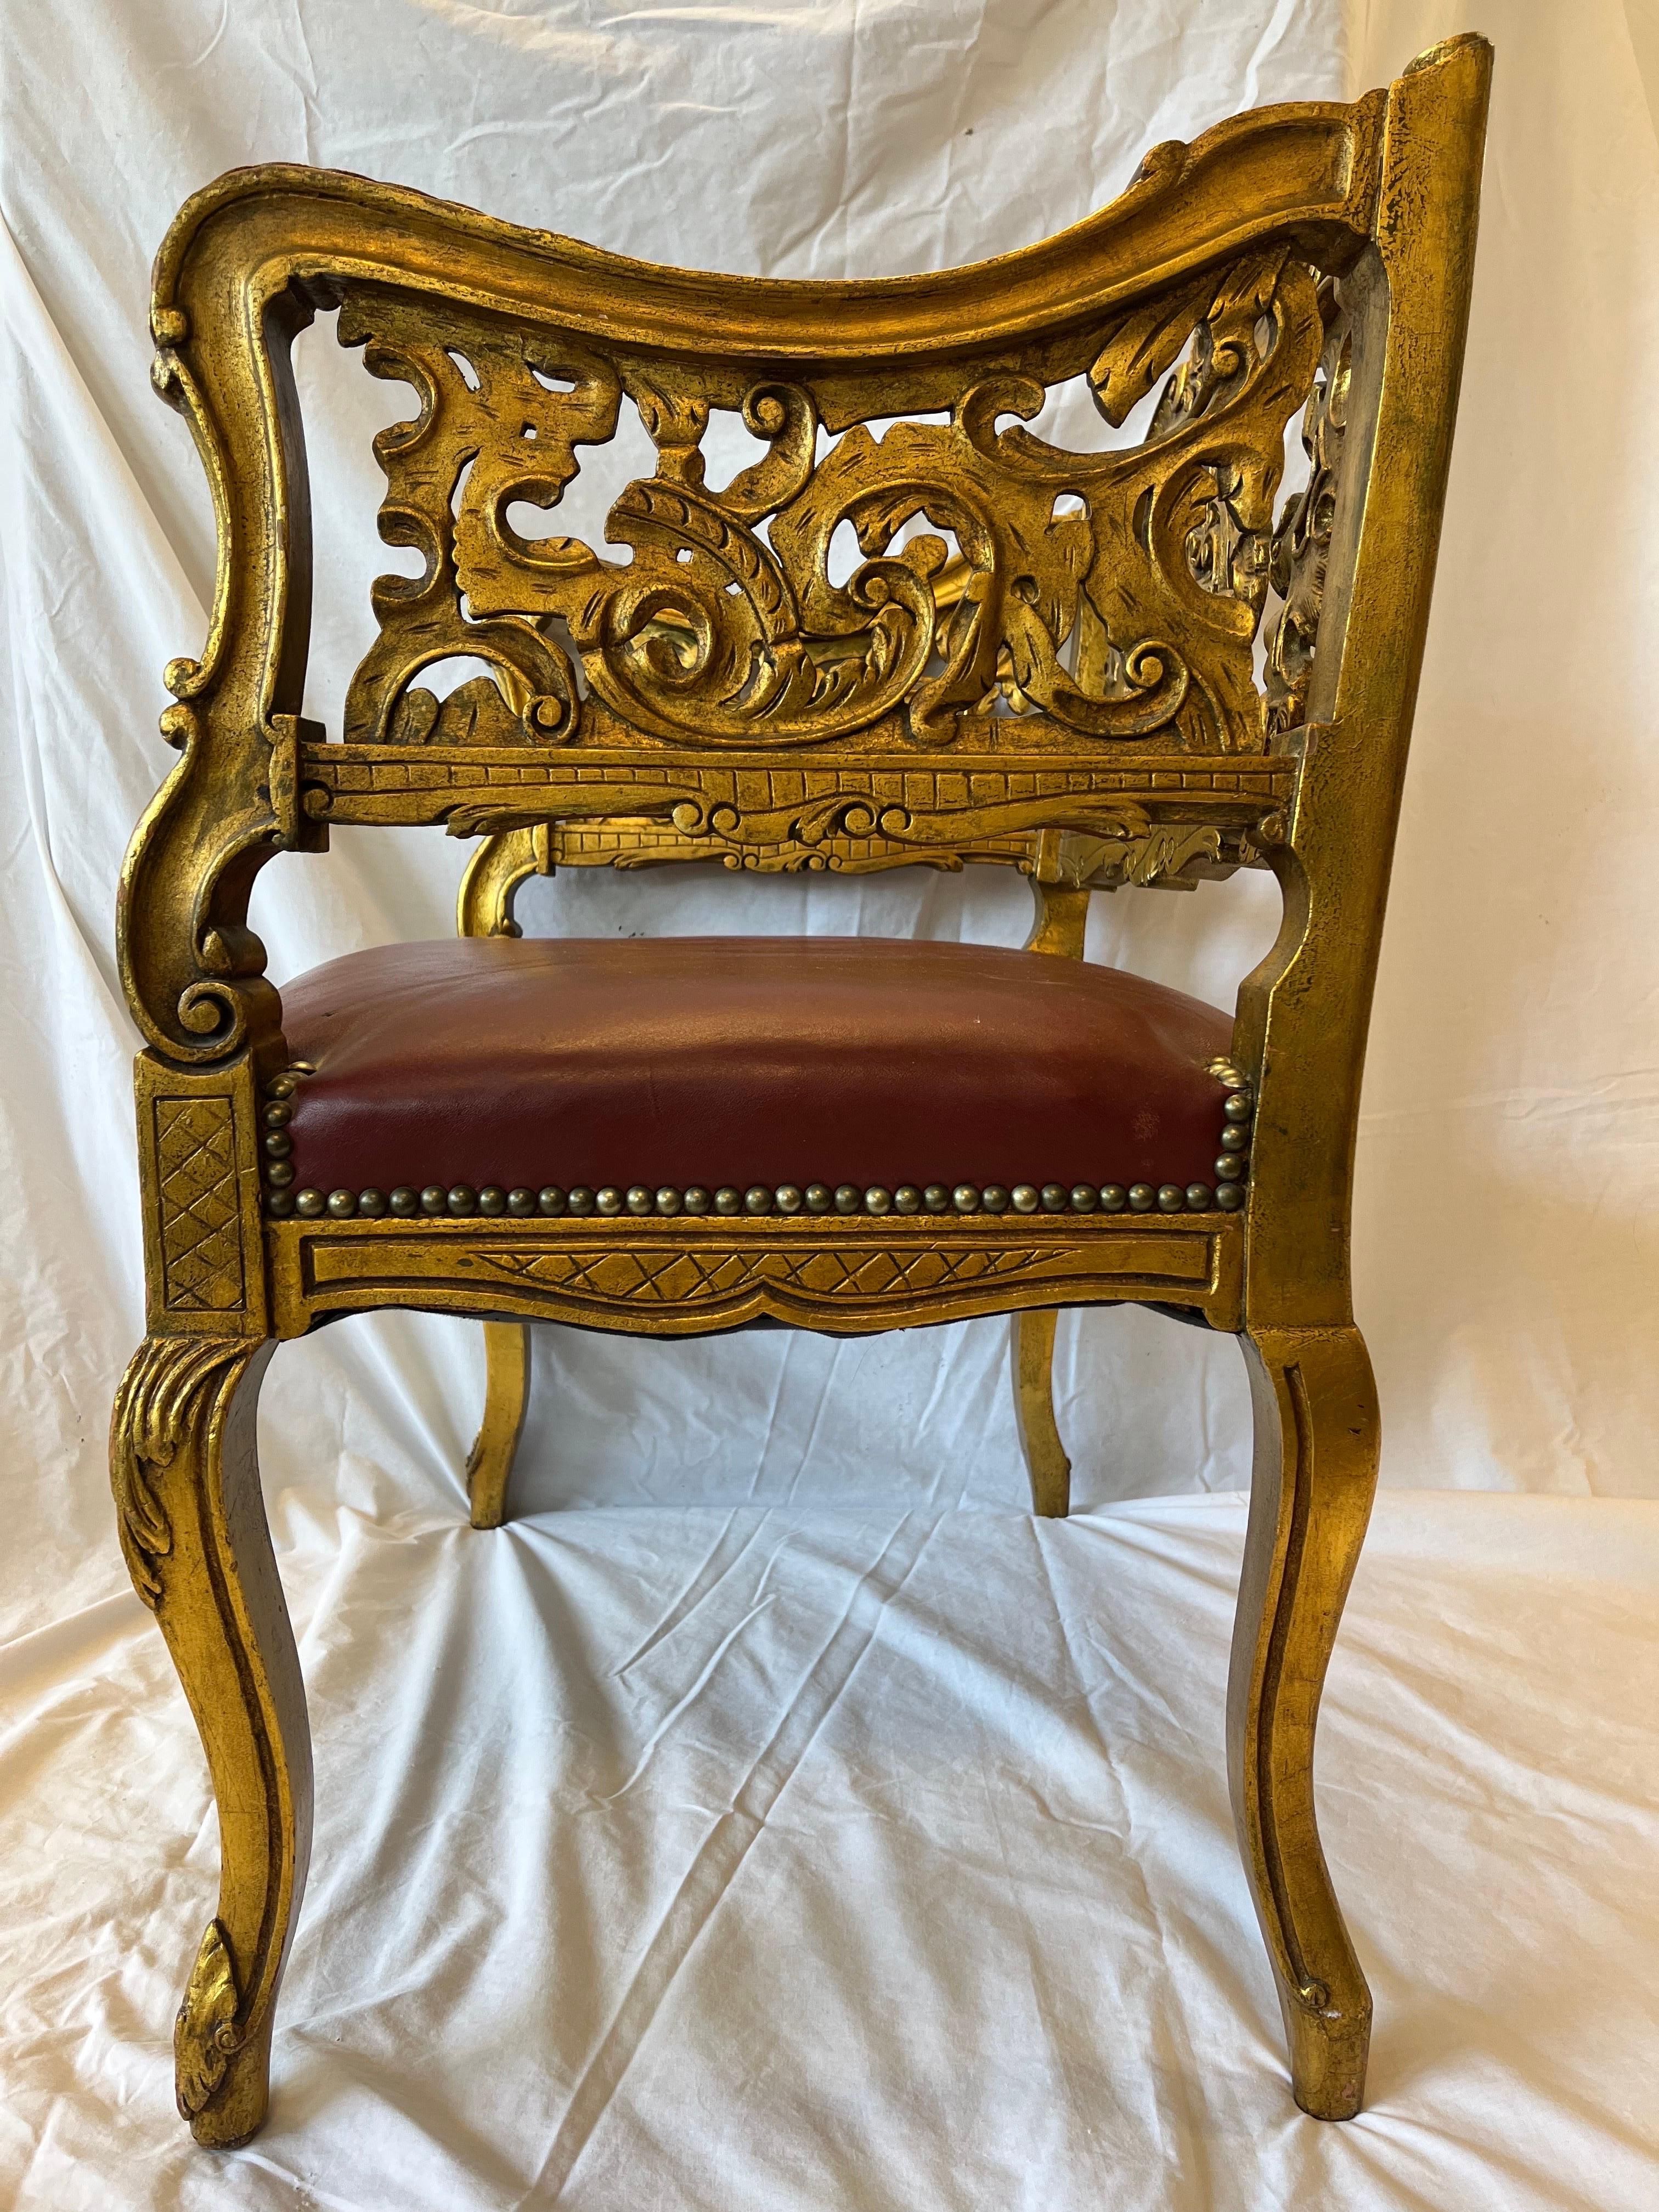 Antique Carved and Gilt Wood Arm Chair Bench Ornate Design Red Upholstered Seat For Sale 4